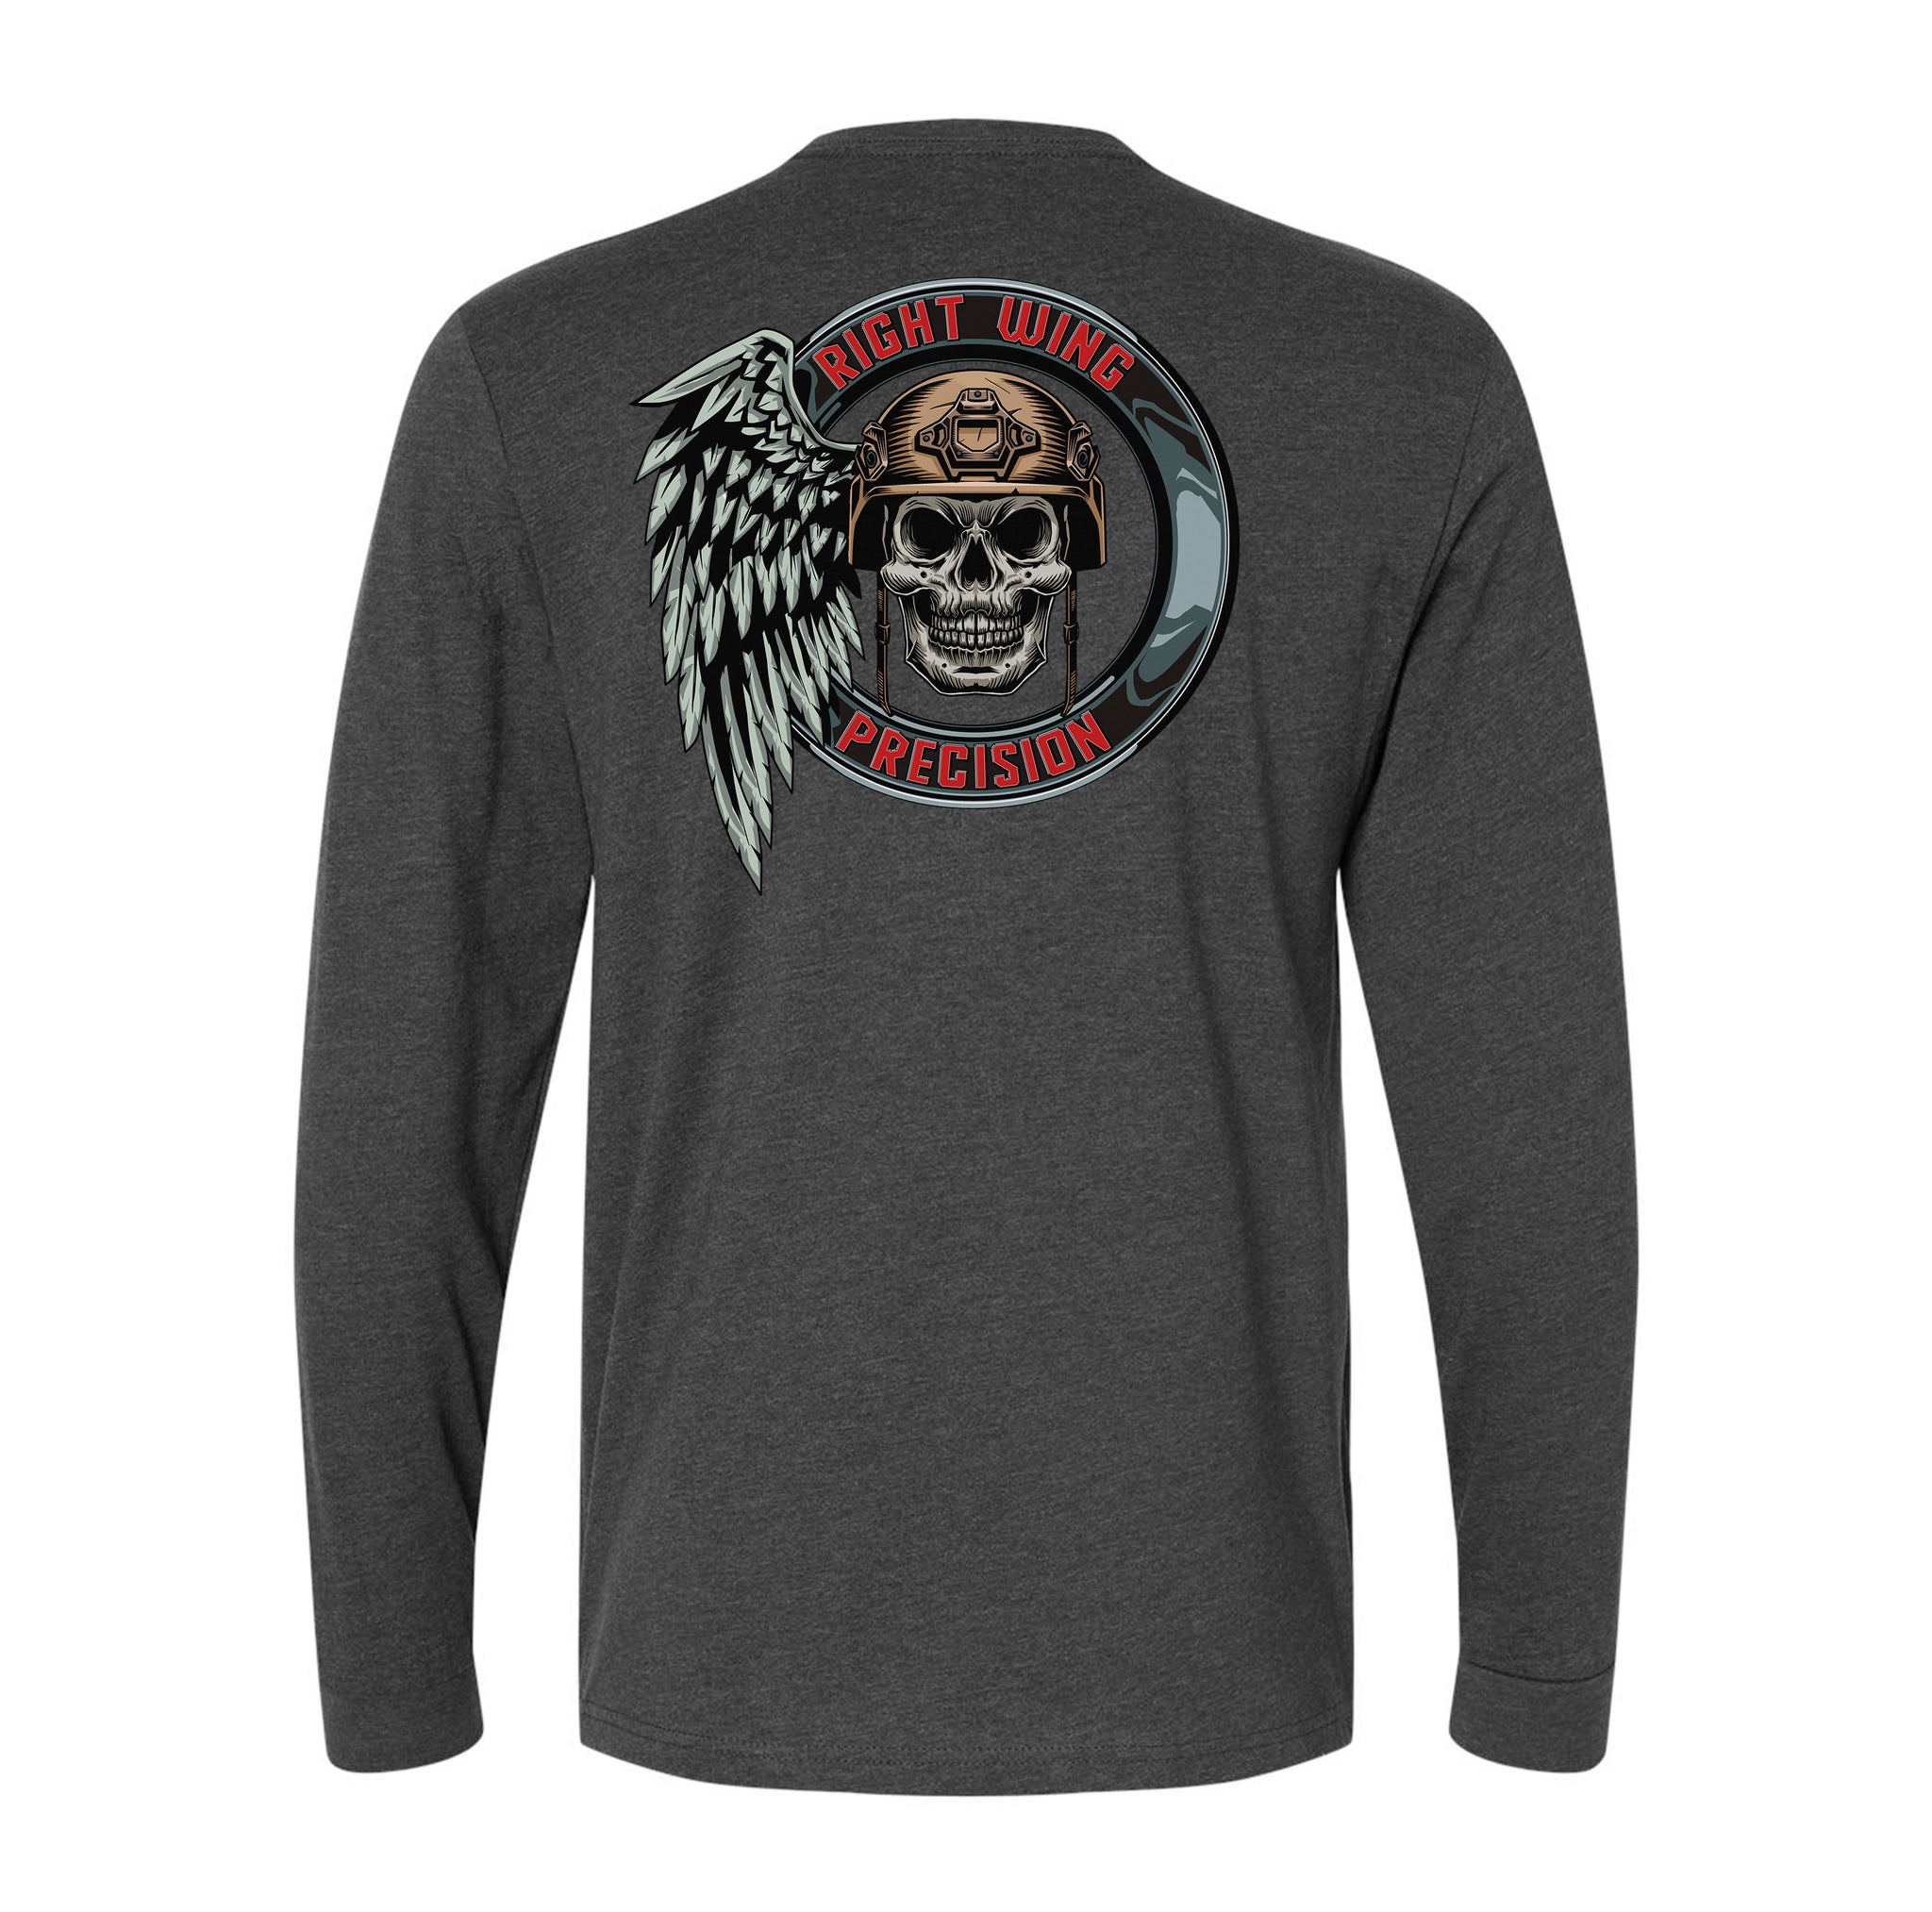 Right Wing Precision Long Sleeve